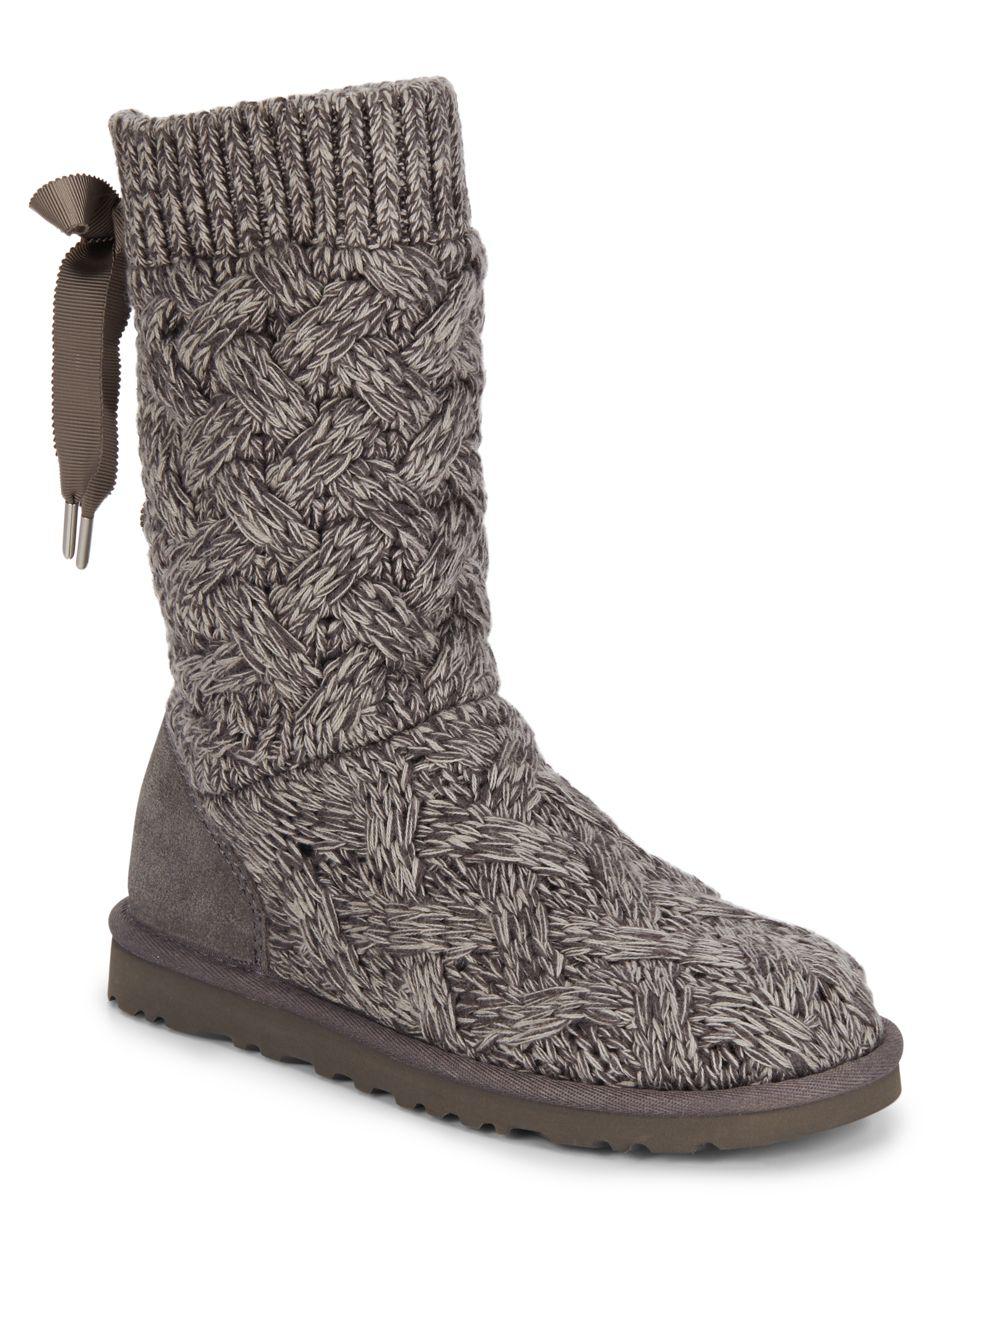 Buy > ugg knot boots > in stock